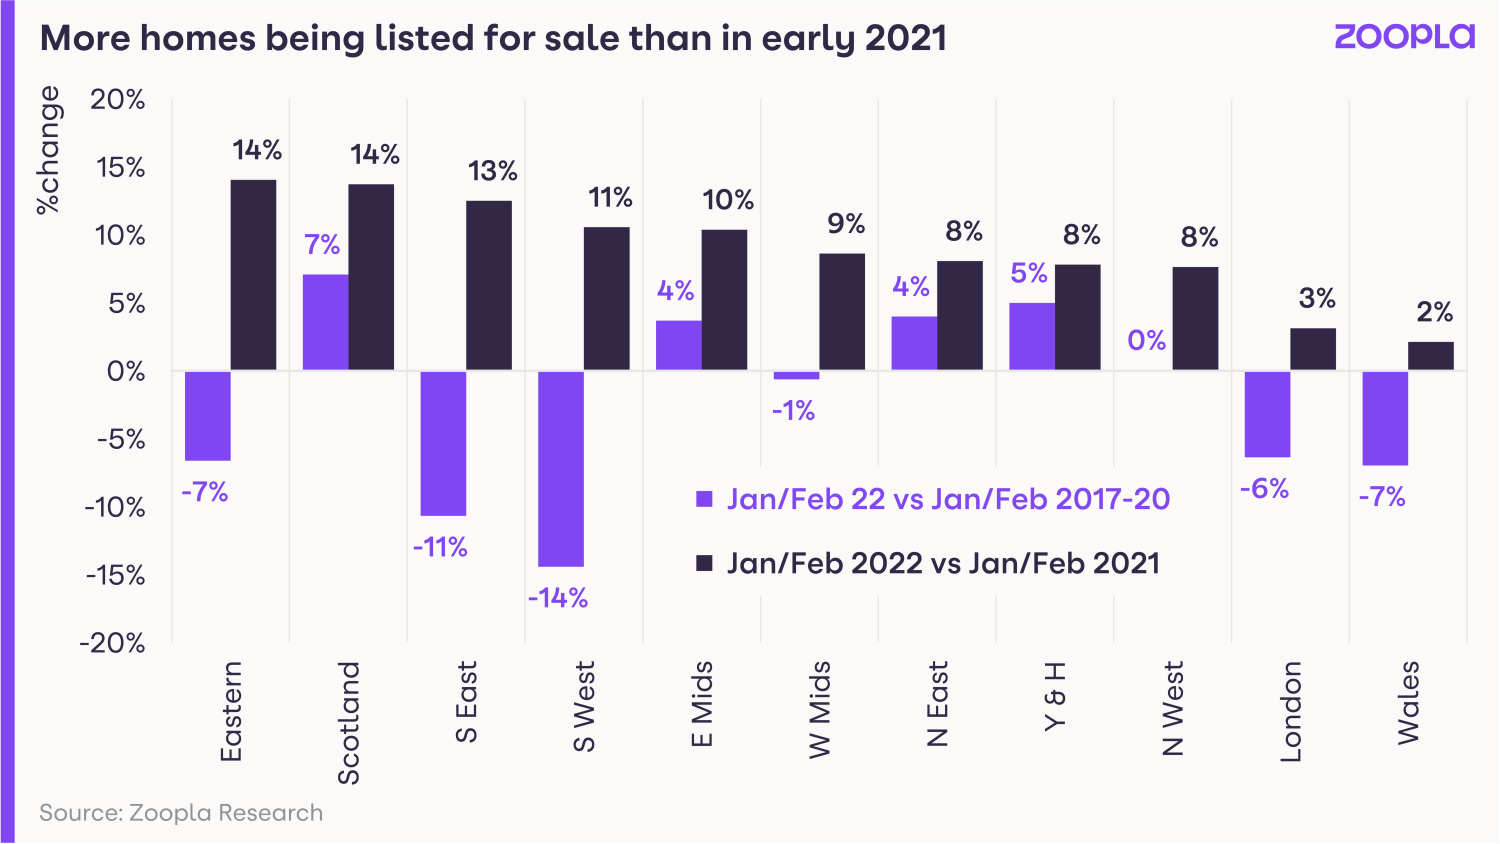 More homes listed for sale than early 2021 - January 2022 - HPI